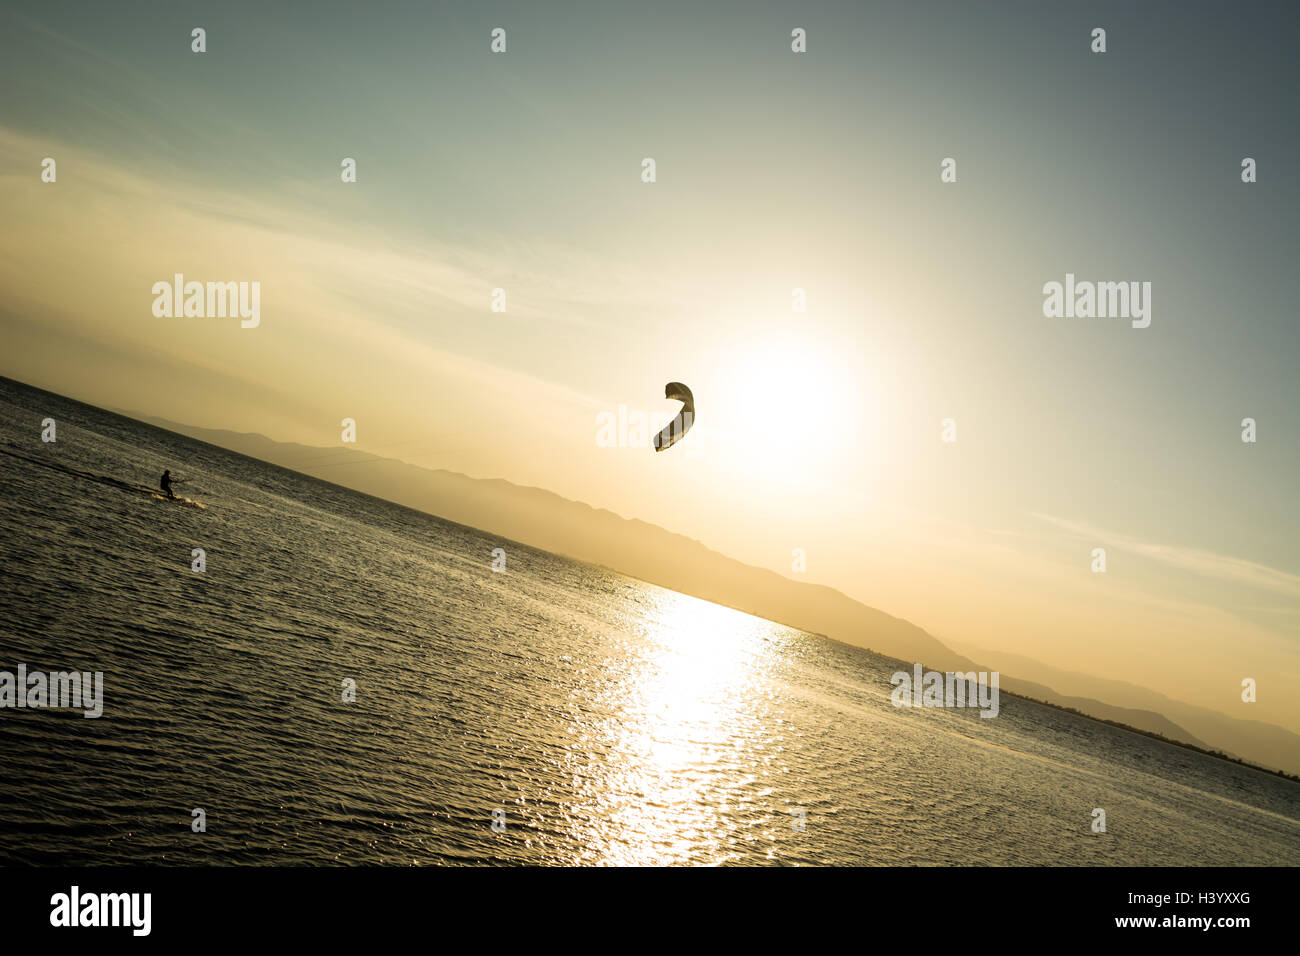 A person doing kitesurf in a calmed bay at sunset. Stock Photo